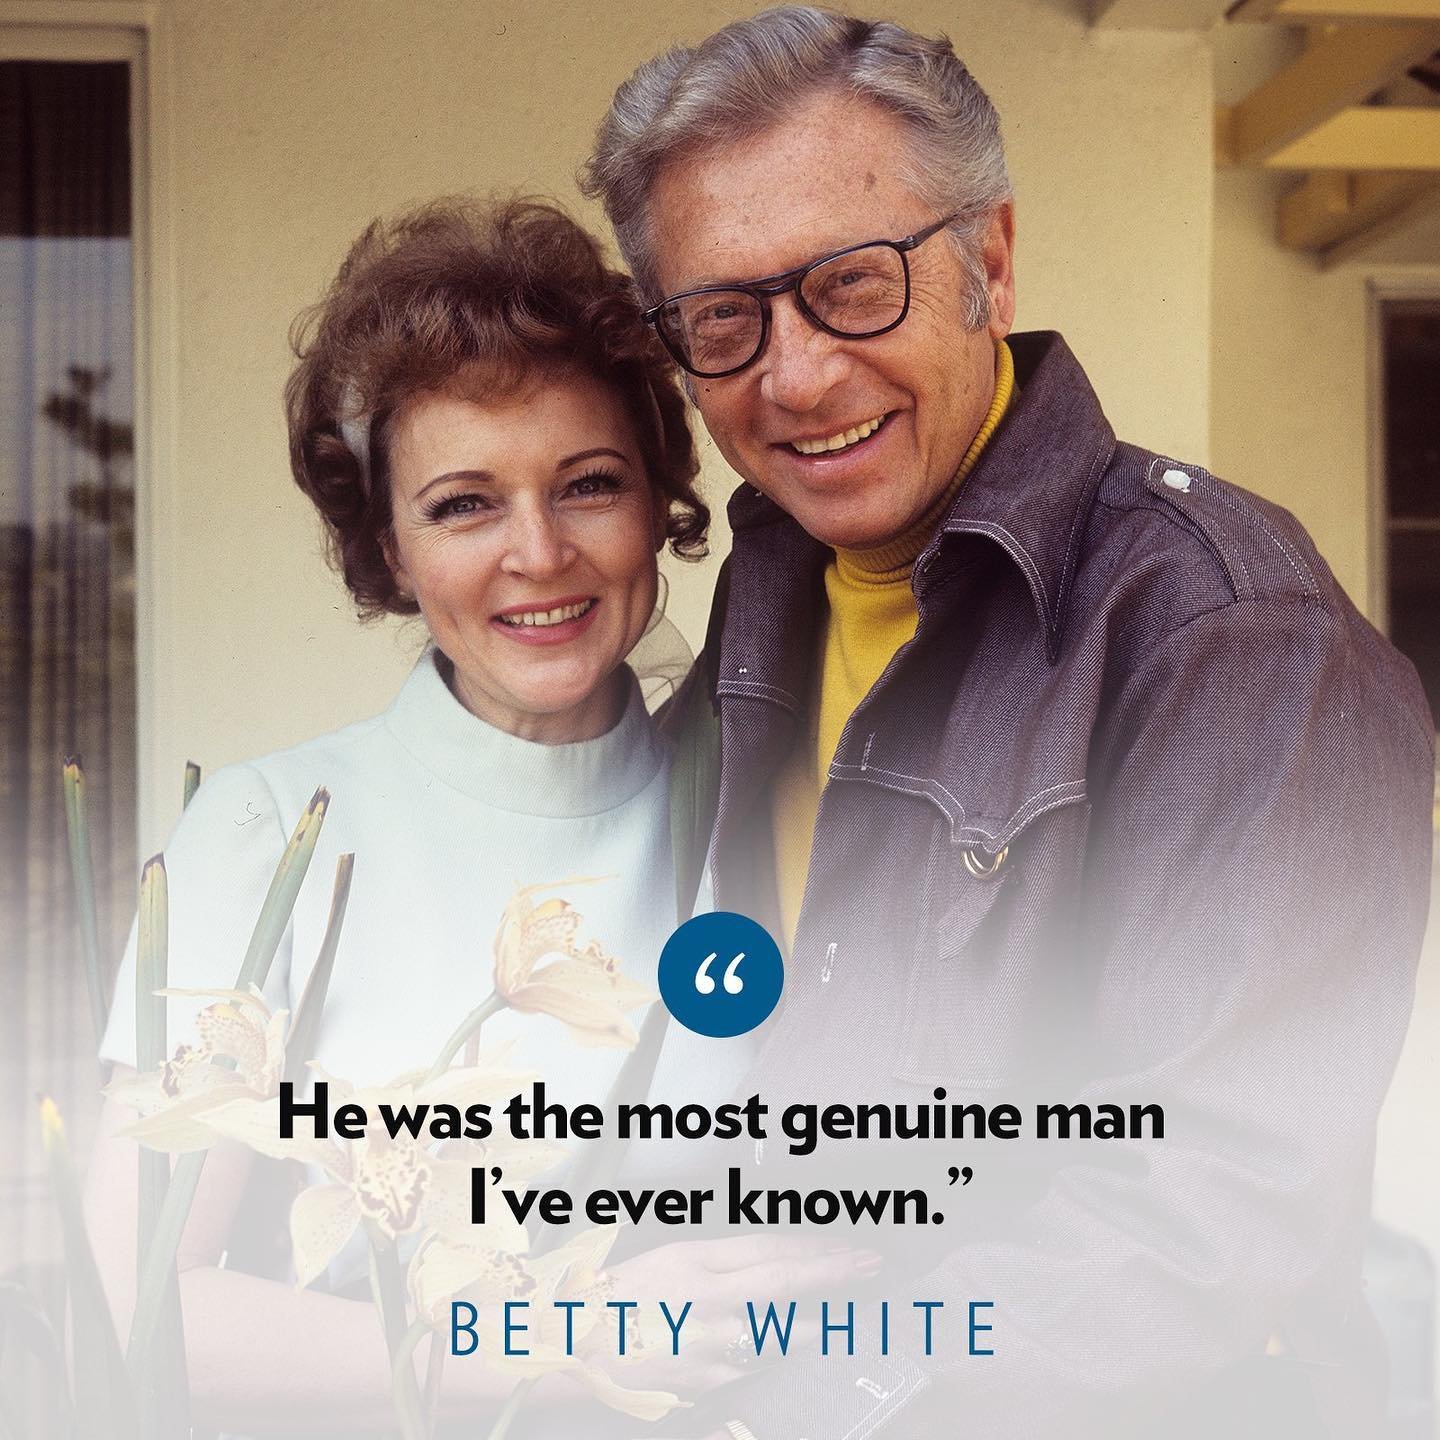 Remembering Betty White: Her love story with husband Allen Ludden